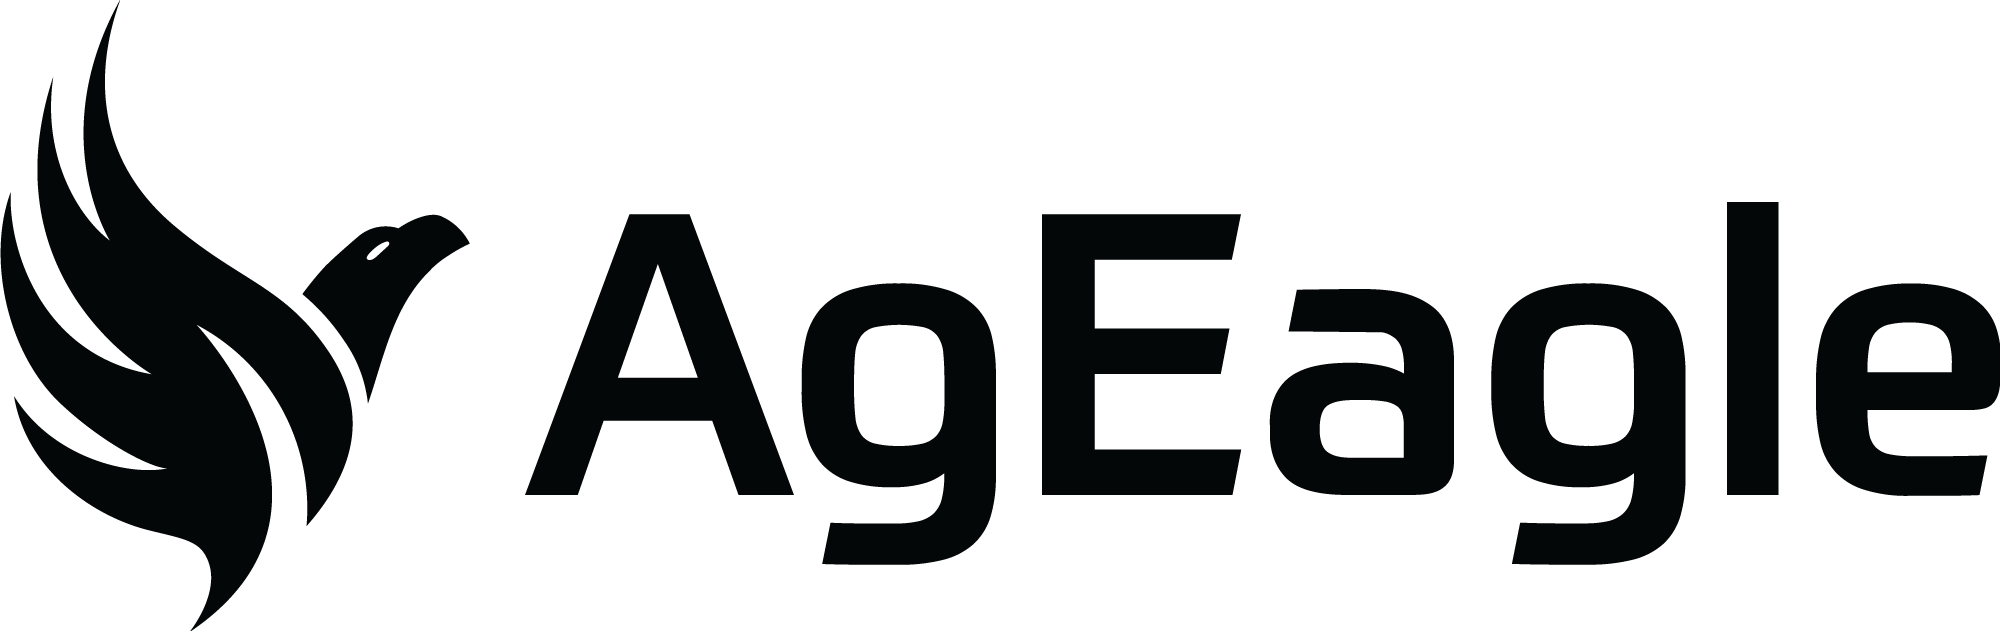 AgEagle Aerial Systems, Inc., Thursday, November 10, 2022, Press release picture